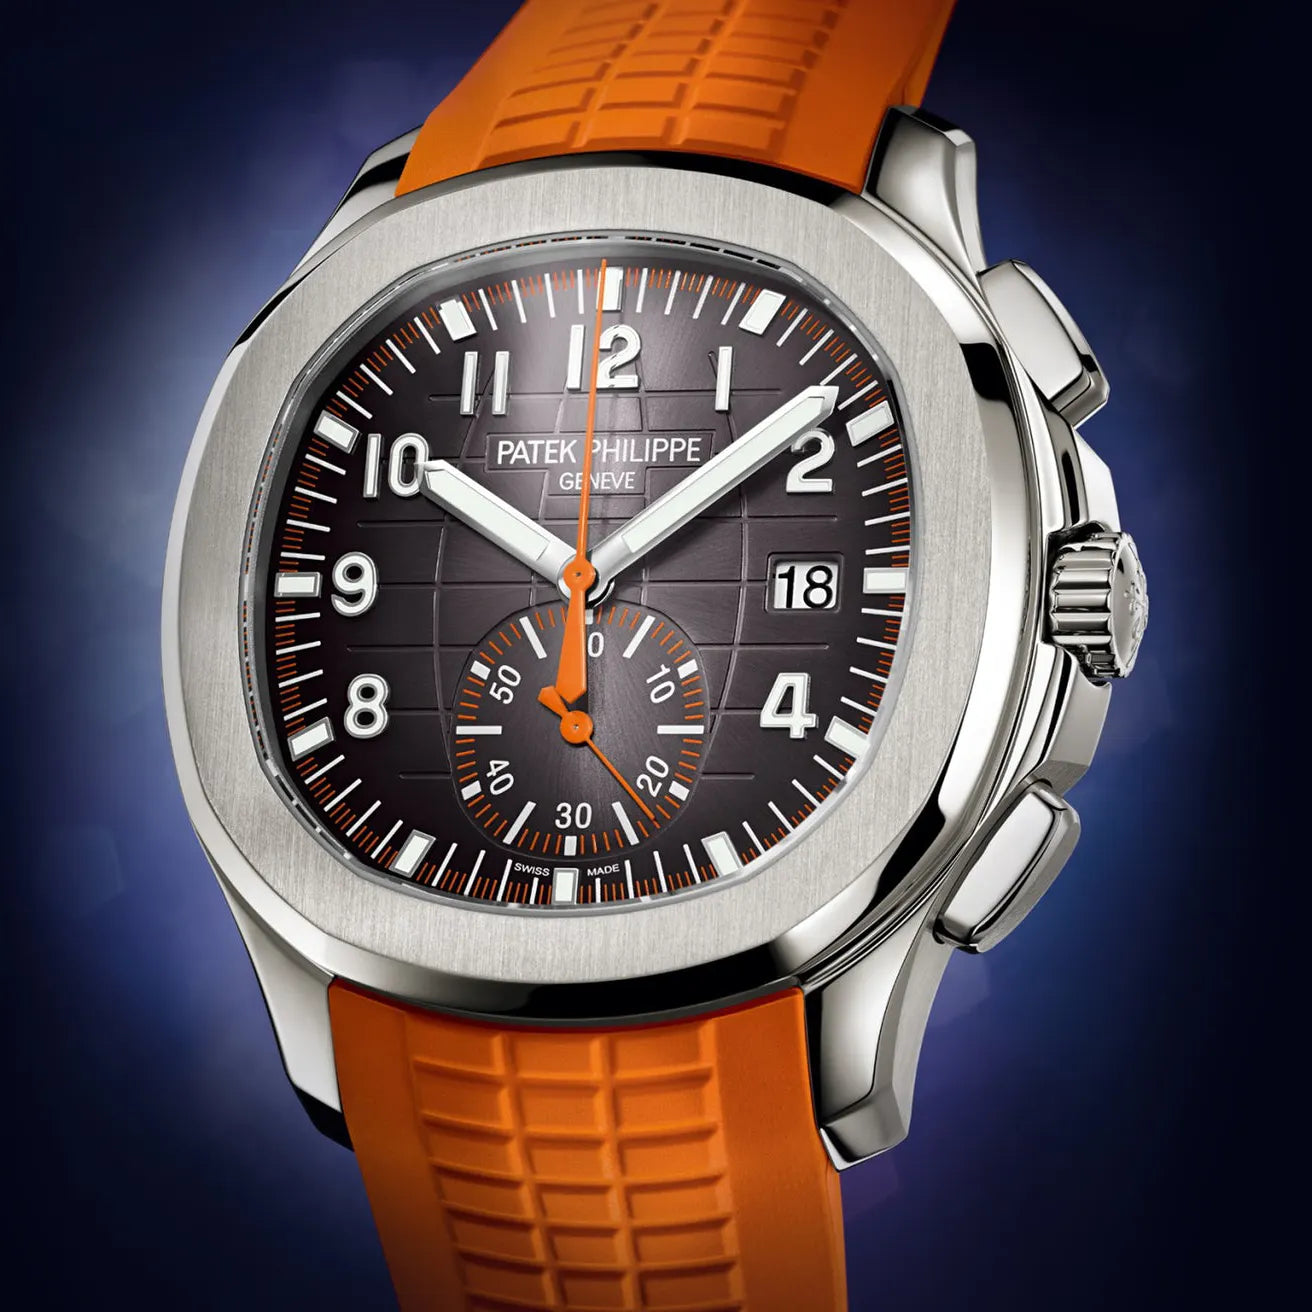 Patek Philippe's Sportiest Timepiece Yet: The Aquanaut Chronograph 5968A